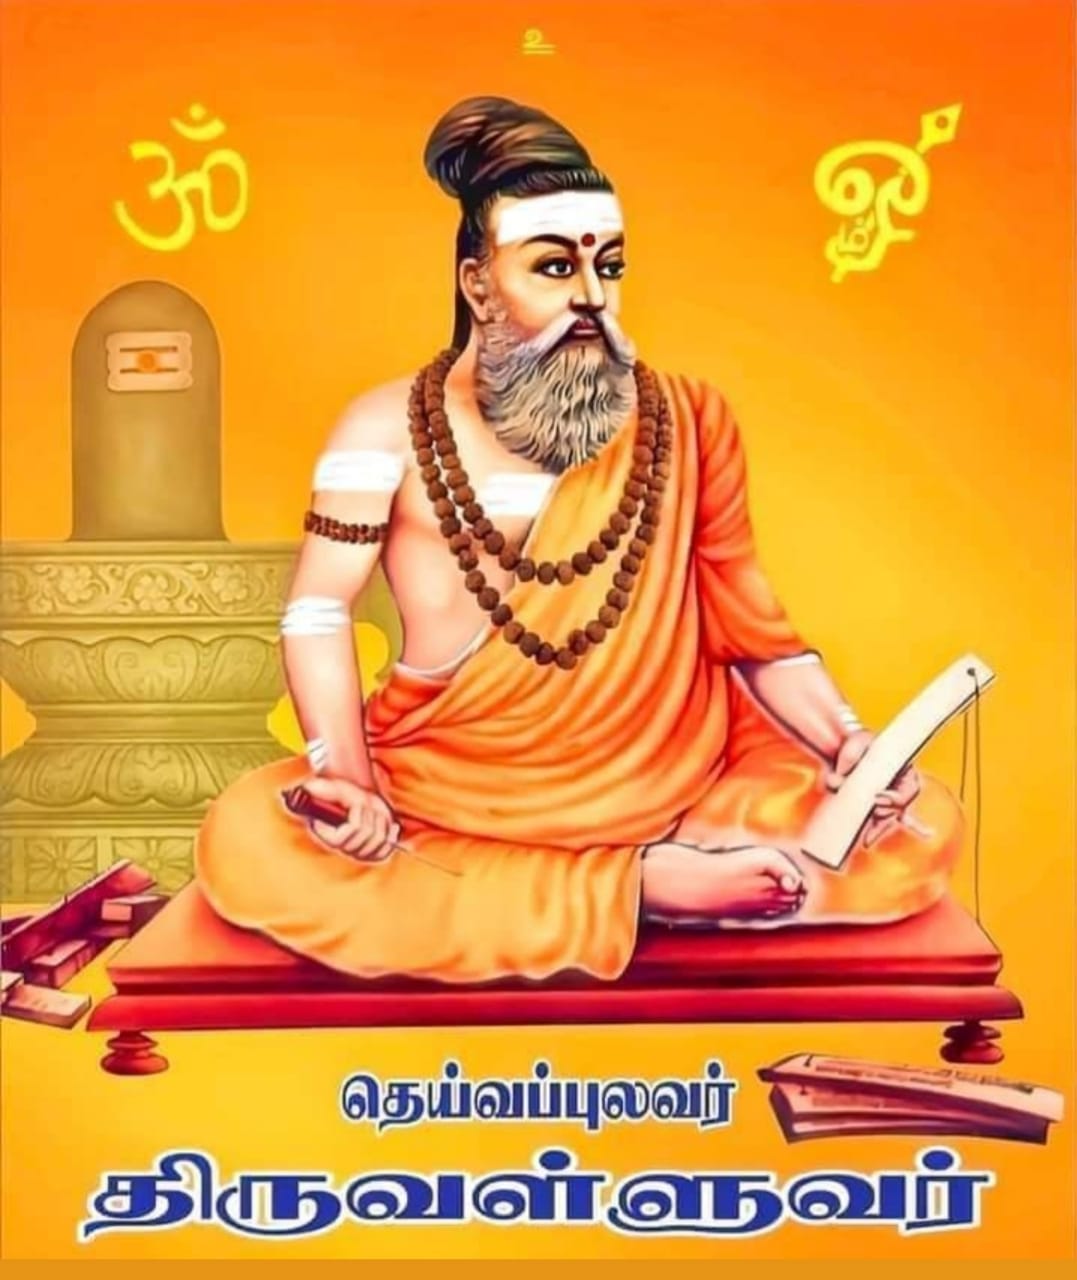 Thiruvalluvar and appropriation attempts by anti-Hindu forces